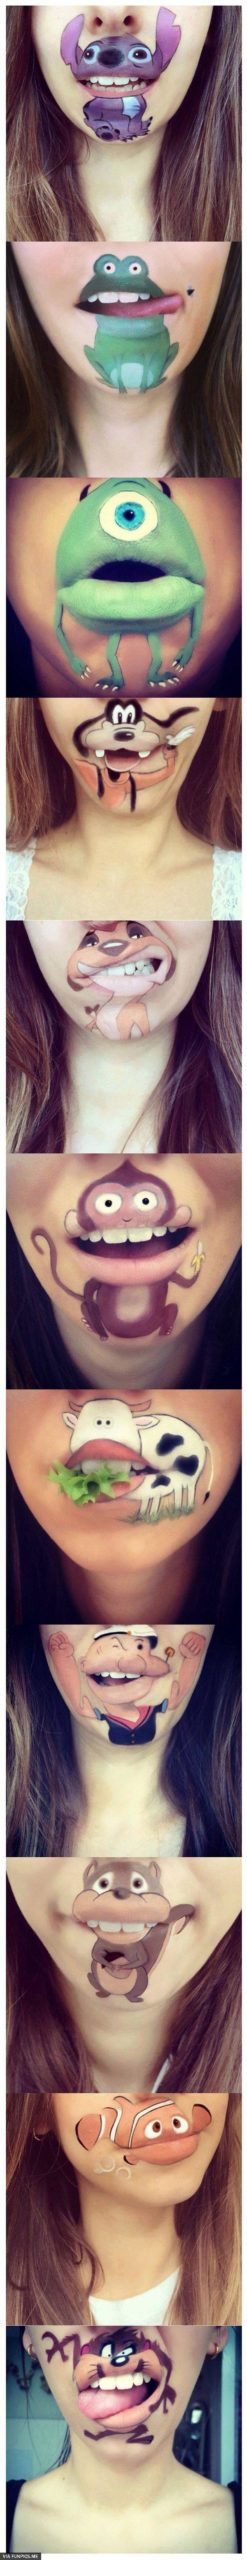 Funny mouth painting art